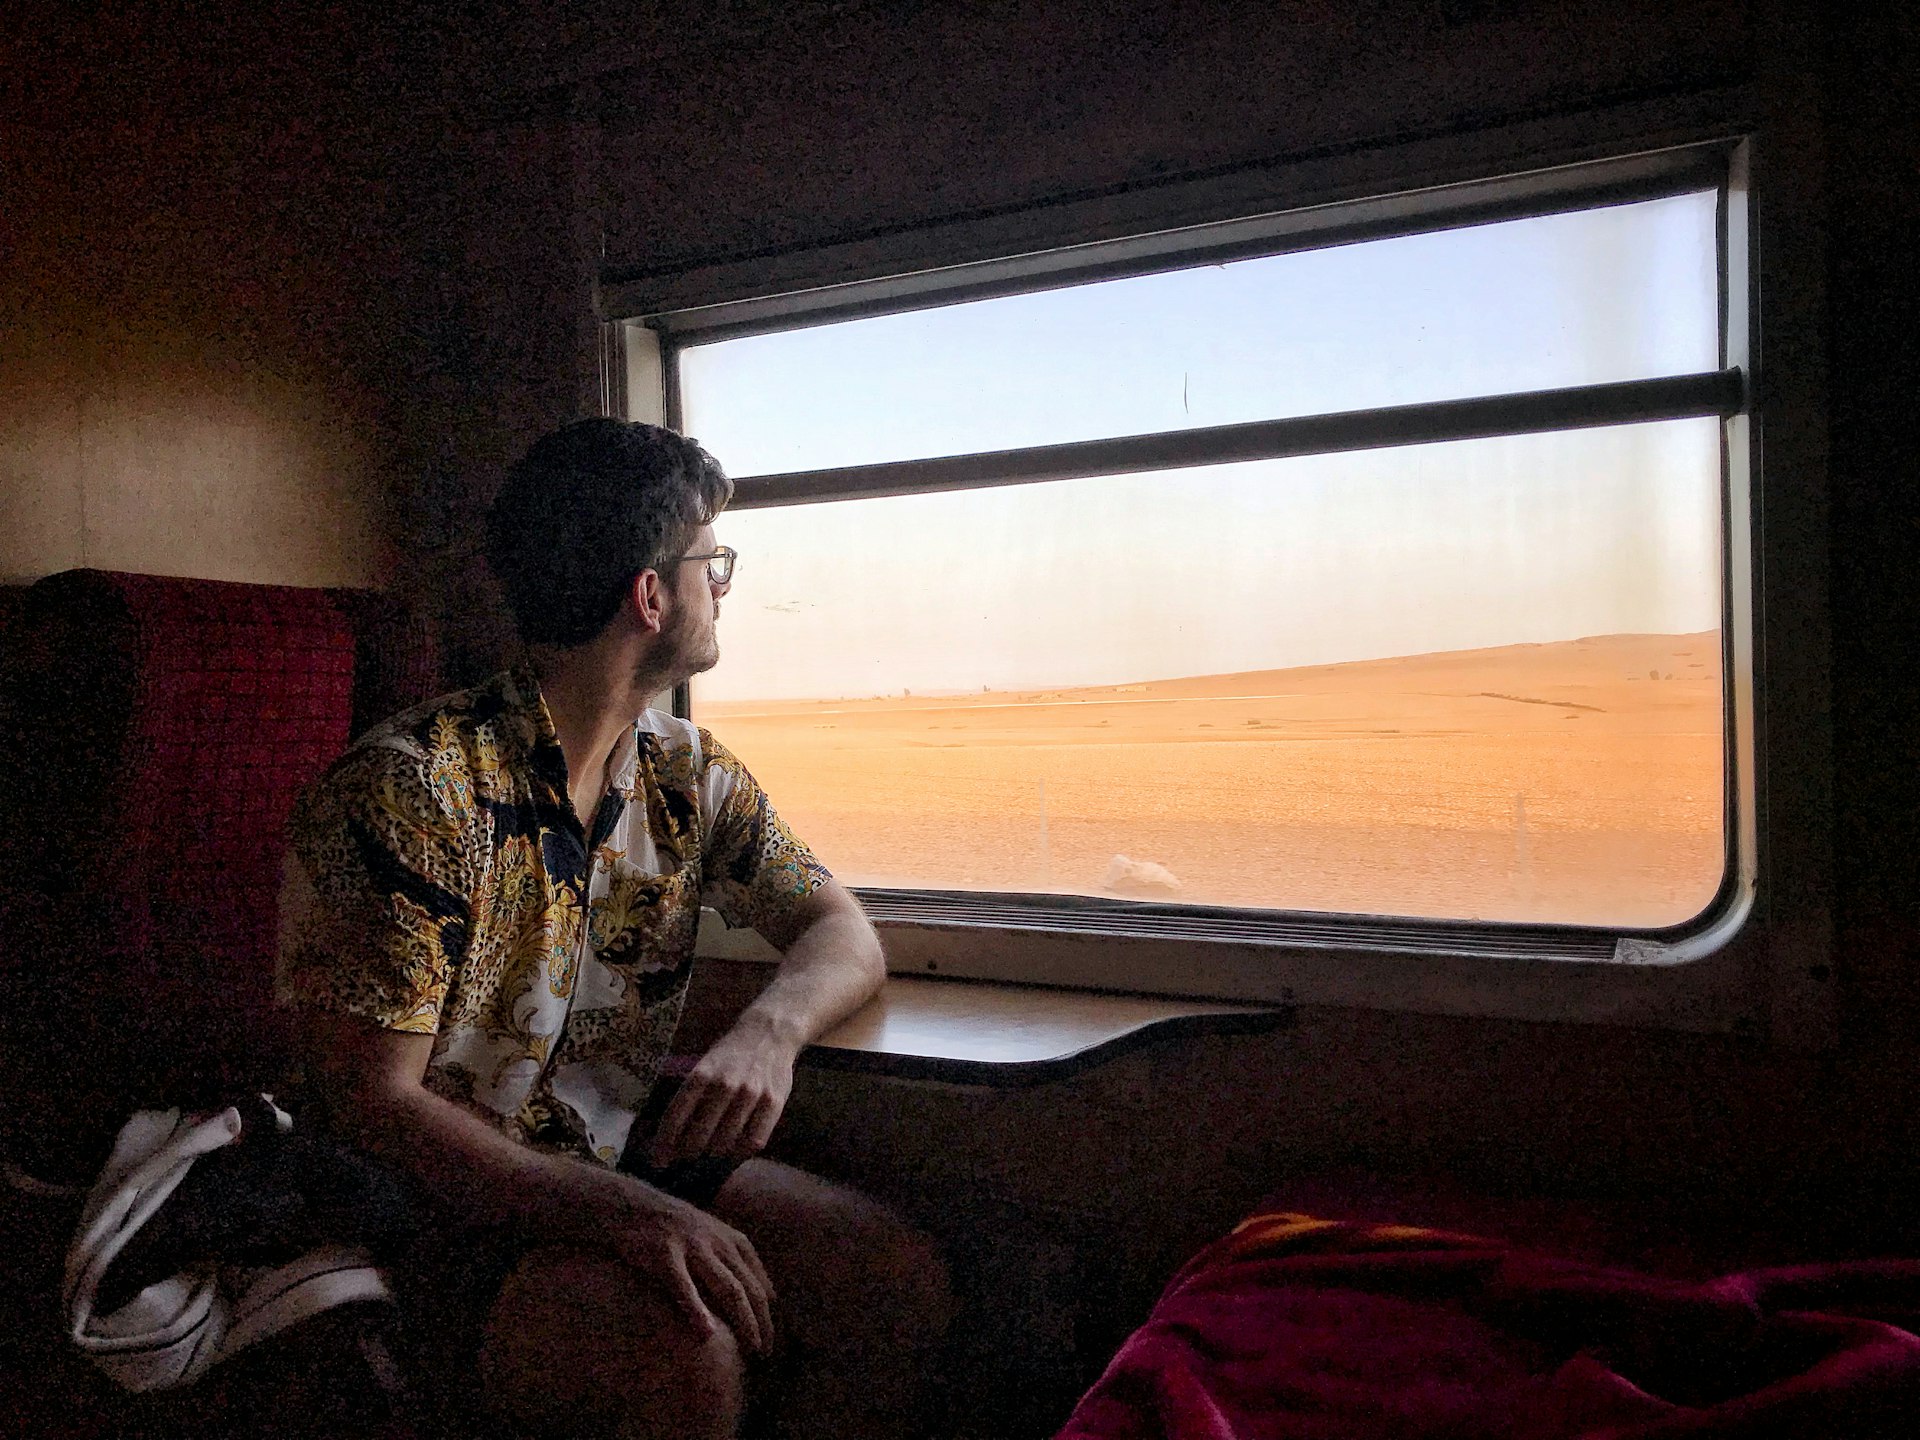 Young man looking through window while on a train in Morocco